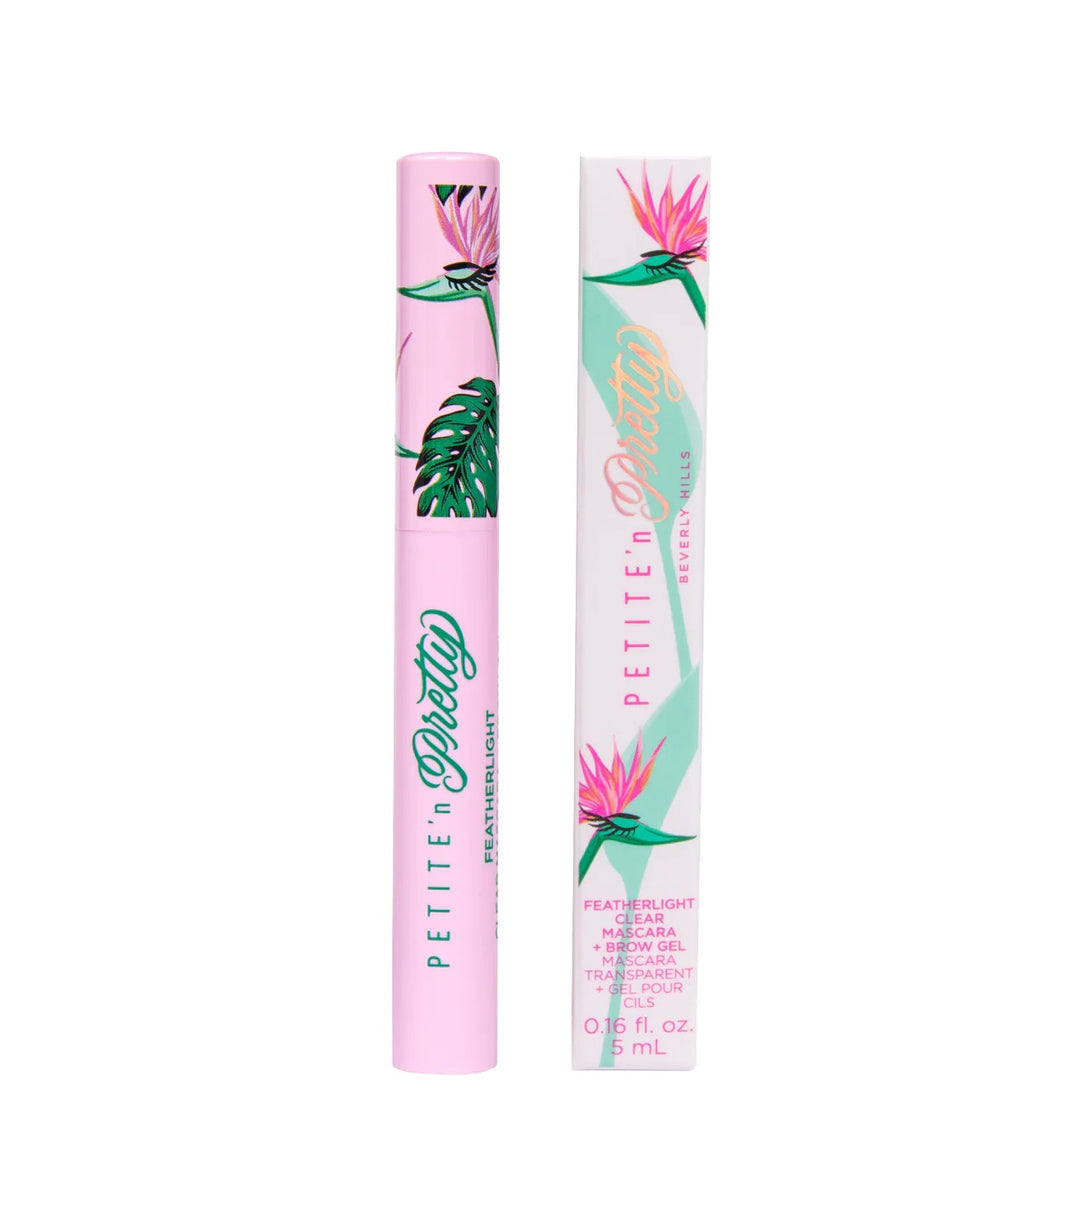 Petite and Pretty Featherlight Clear Mascara & Brow Gel